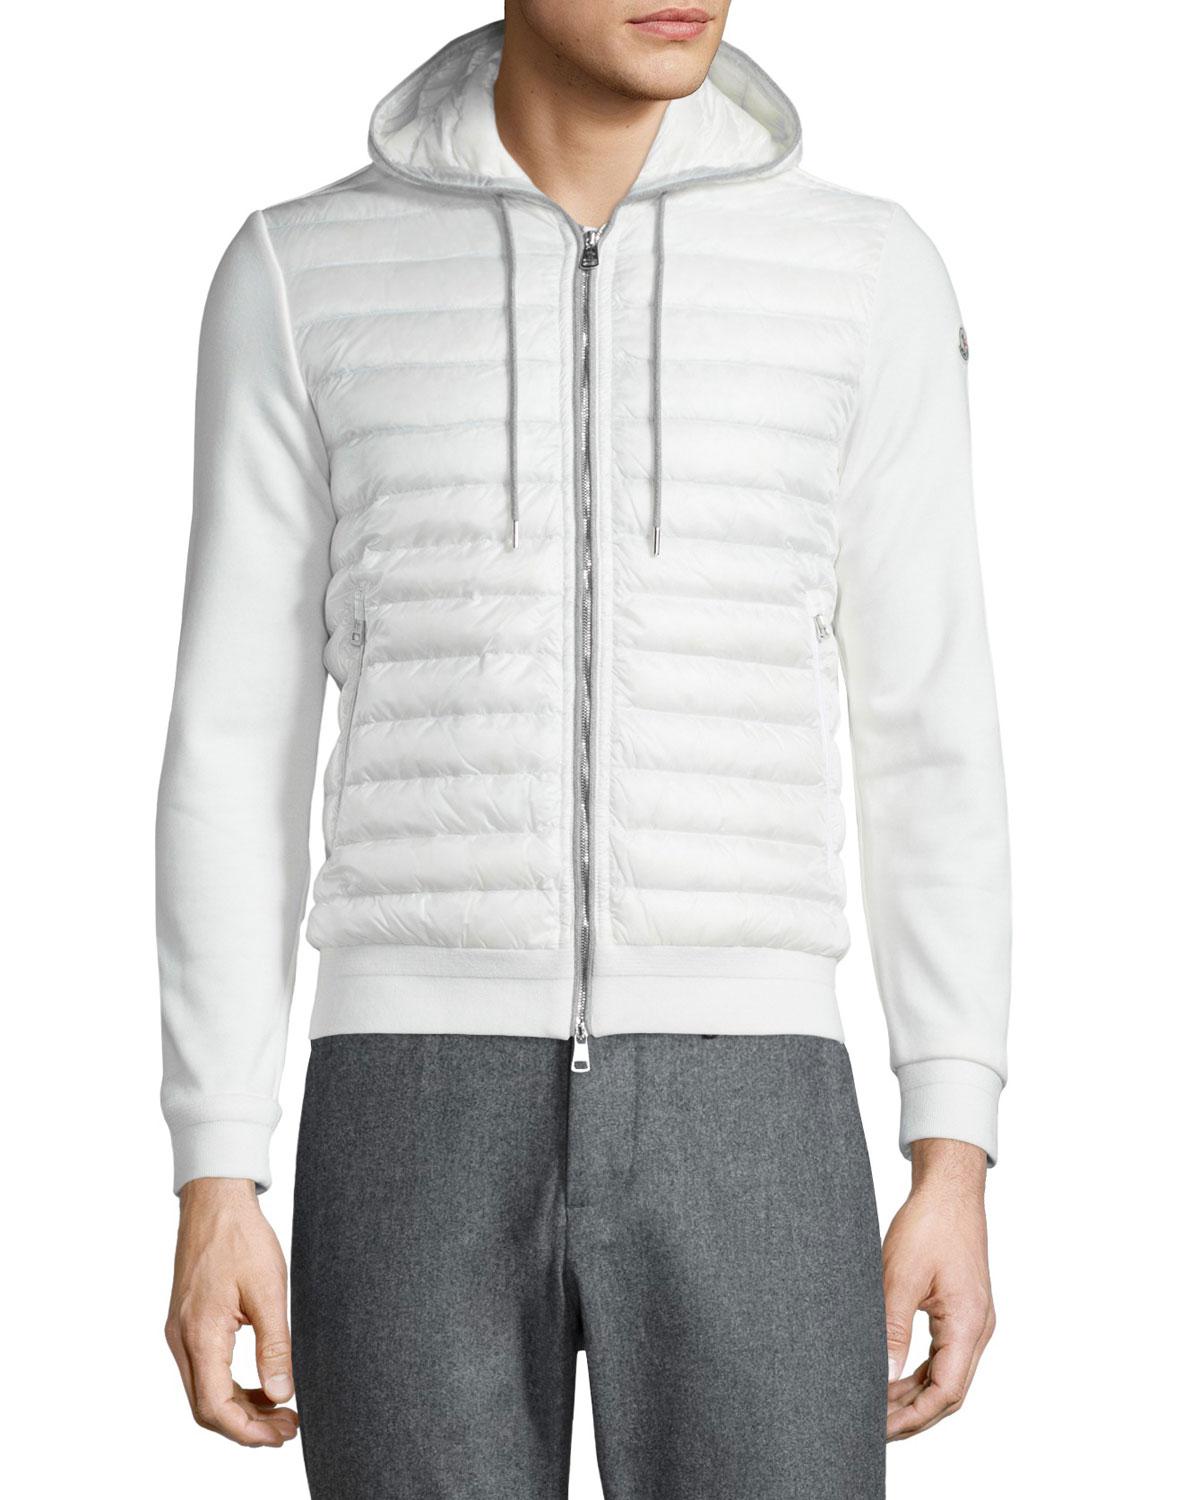 Moncler Quilted Nylon Zip-up Hoodie in White for Men - Lyst